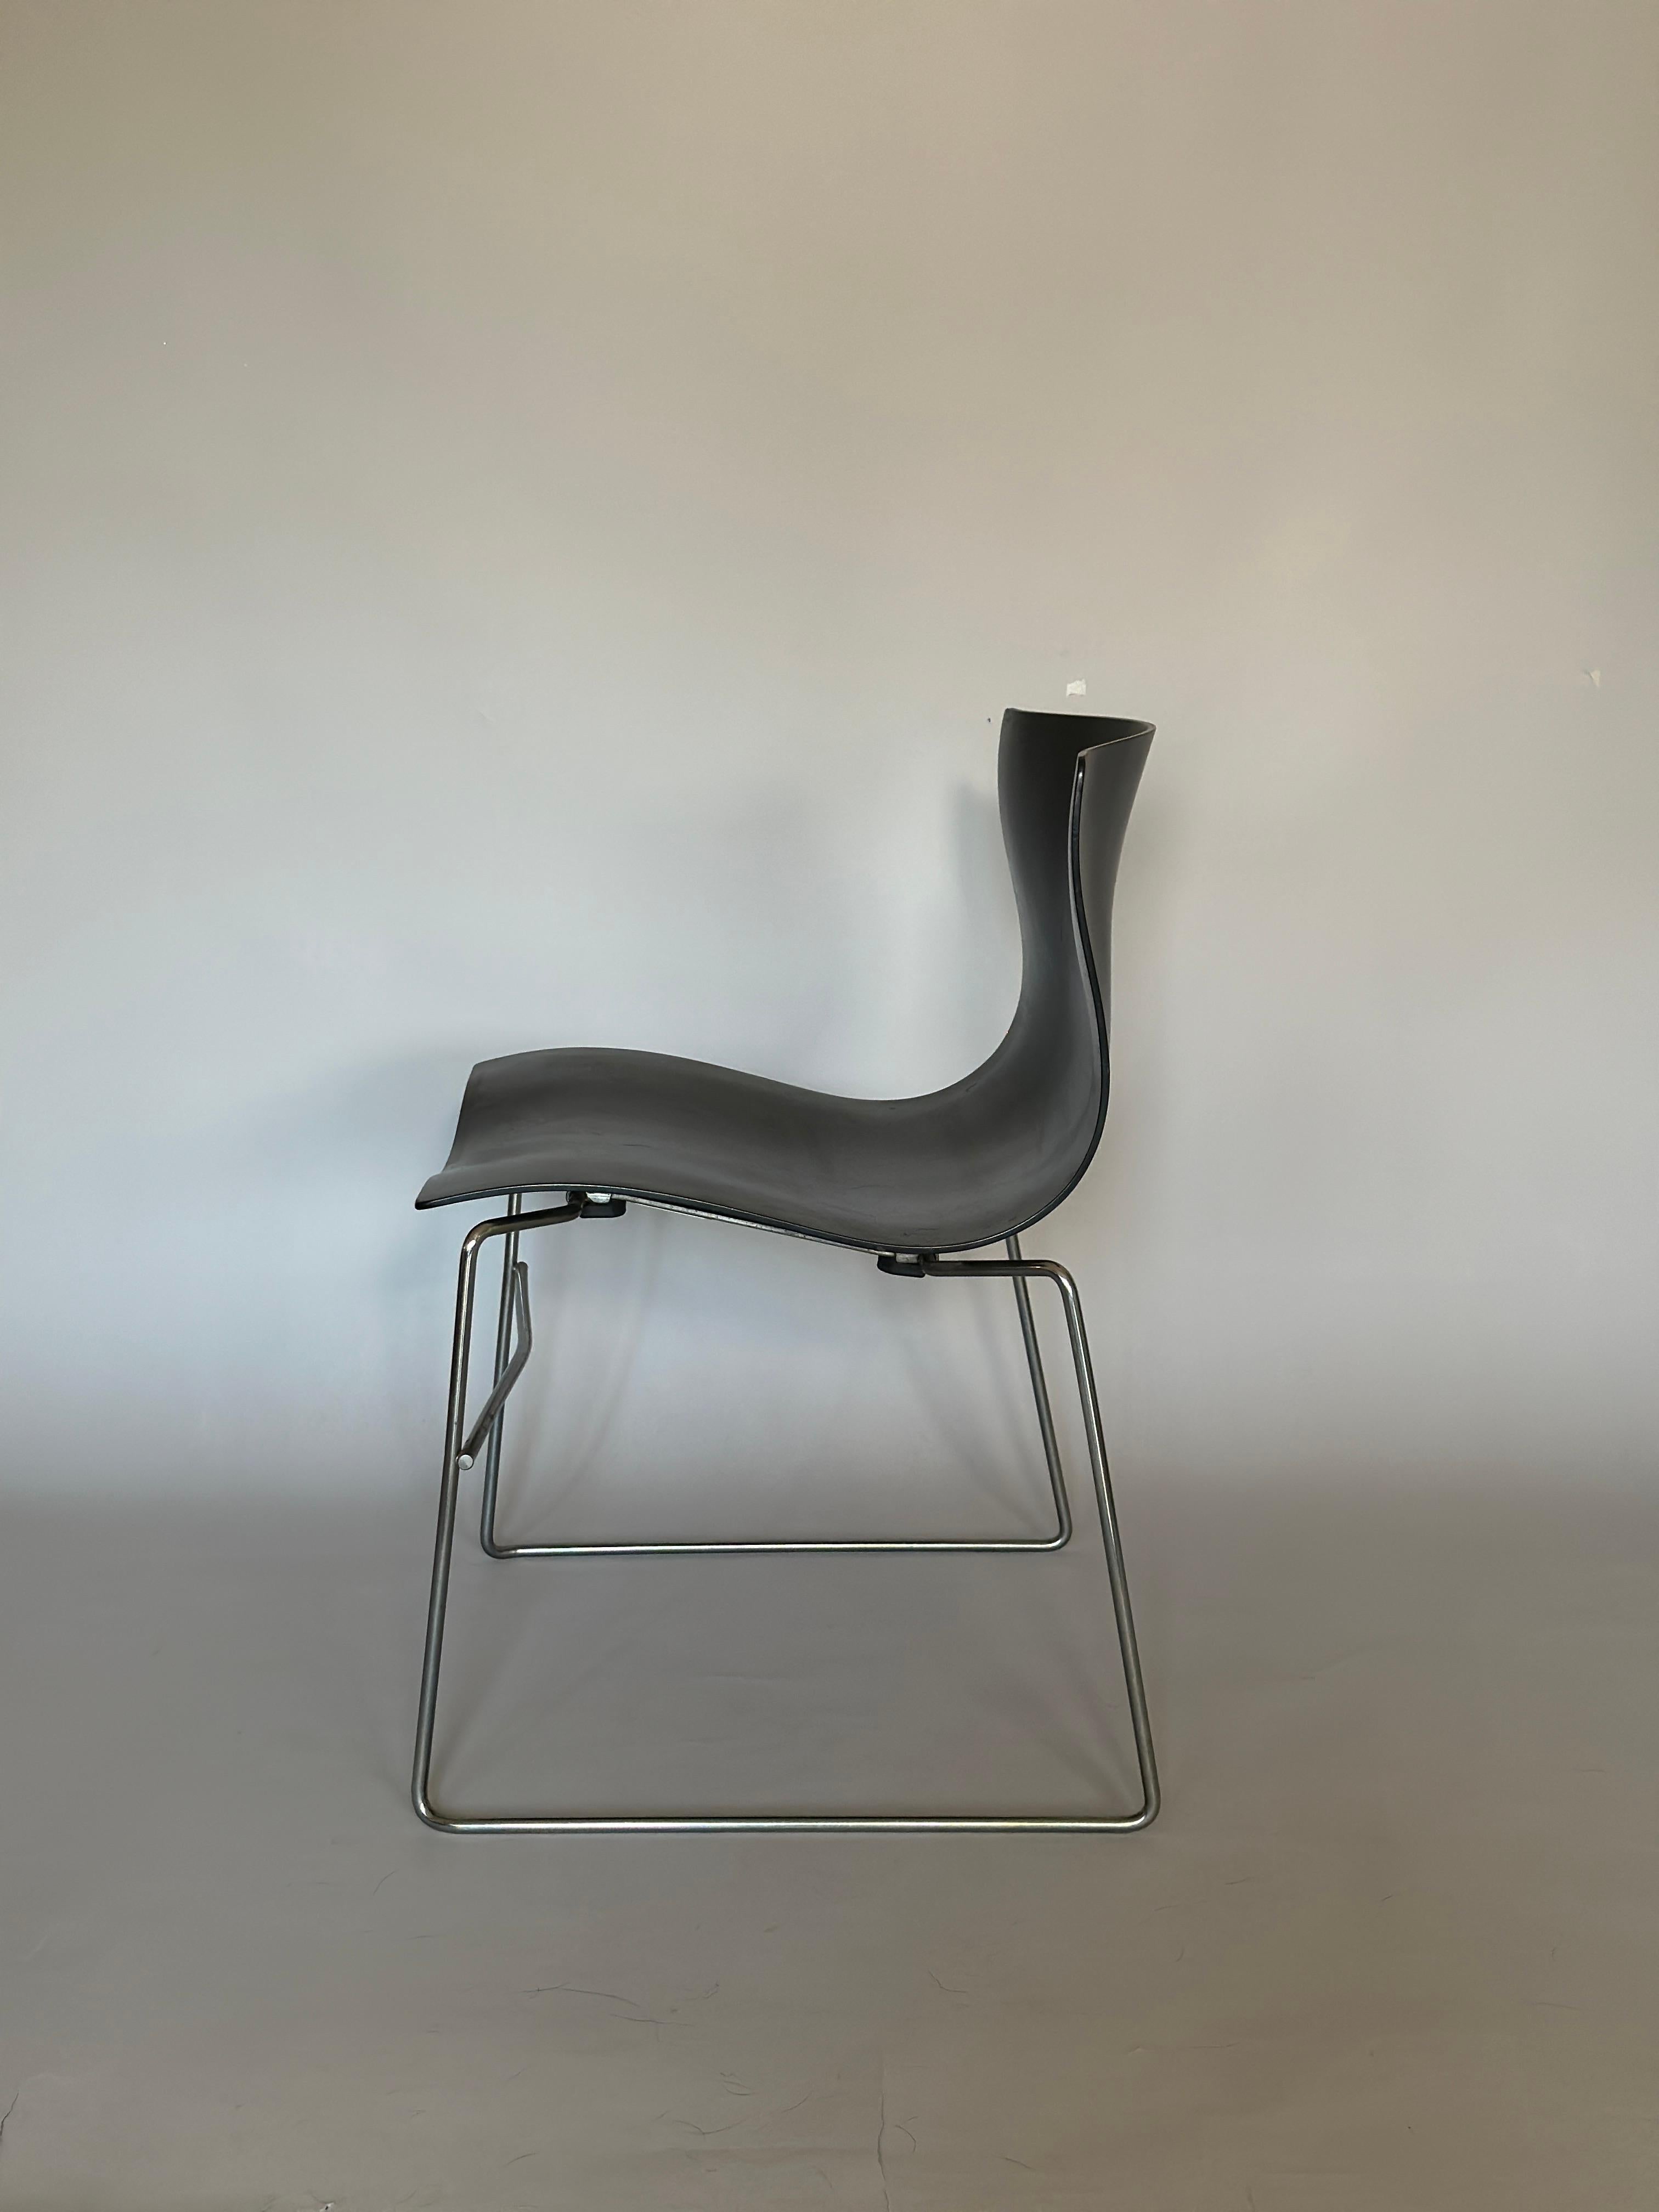 Late 20th Century Knoll chairs by Massimo Vagnelli 1985 For Sale